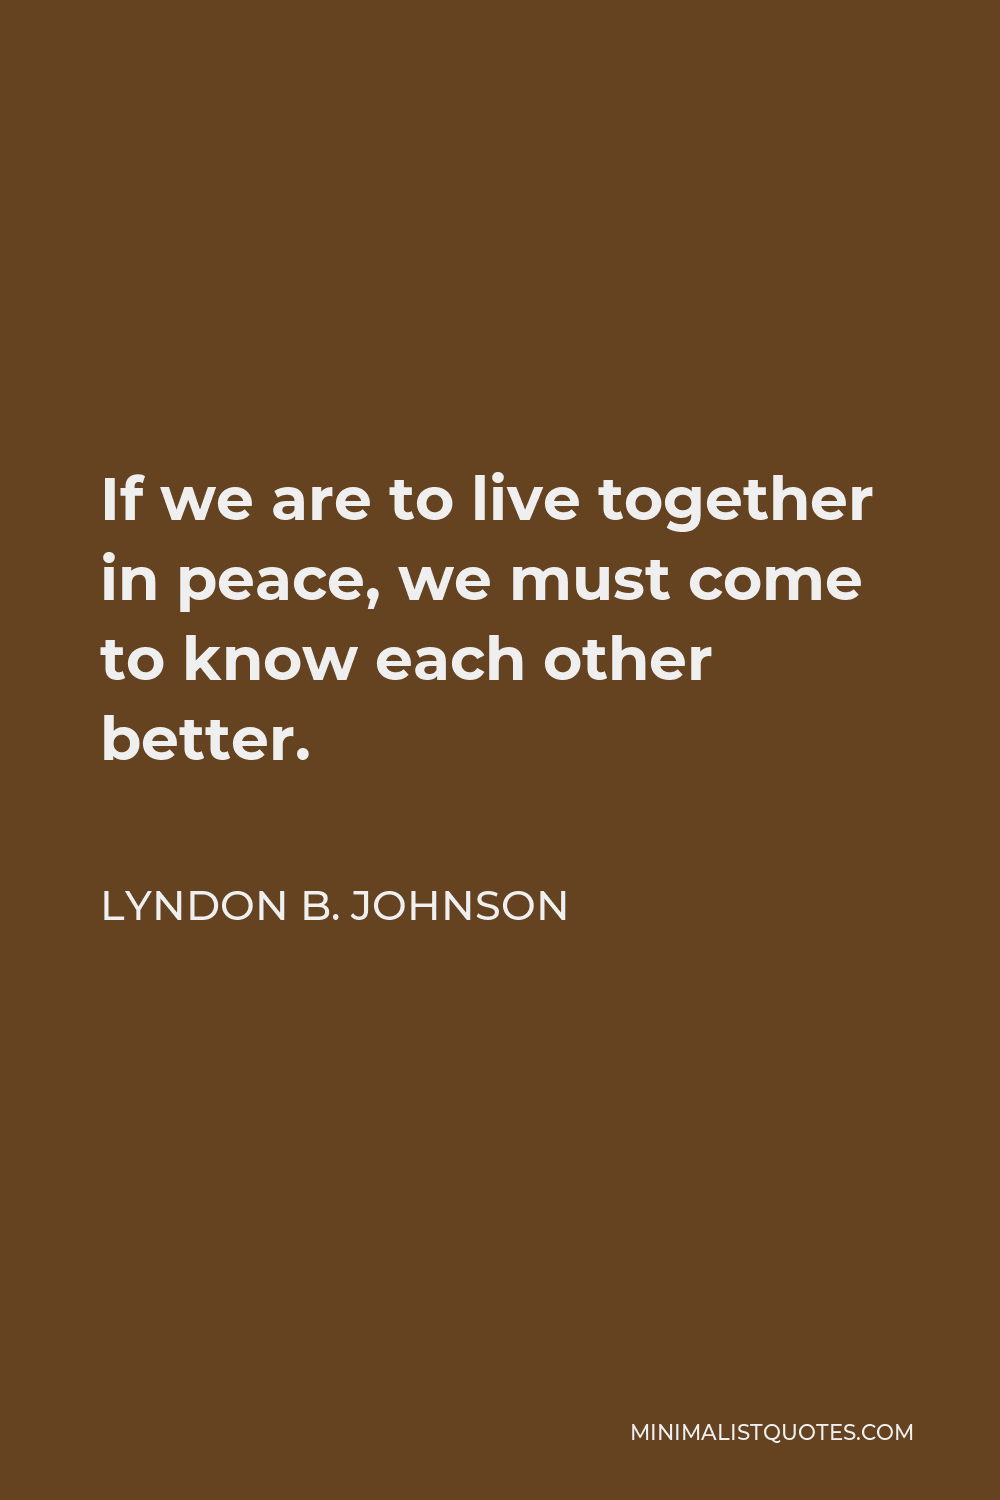 Lyndon B. Johnson Quote - If we are to live together in peace, we must come to know each other better.